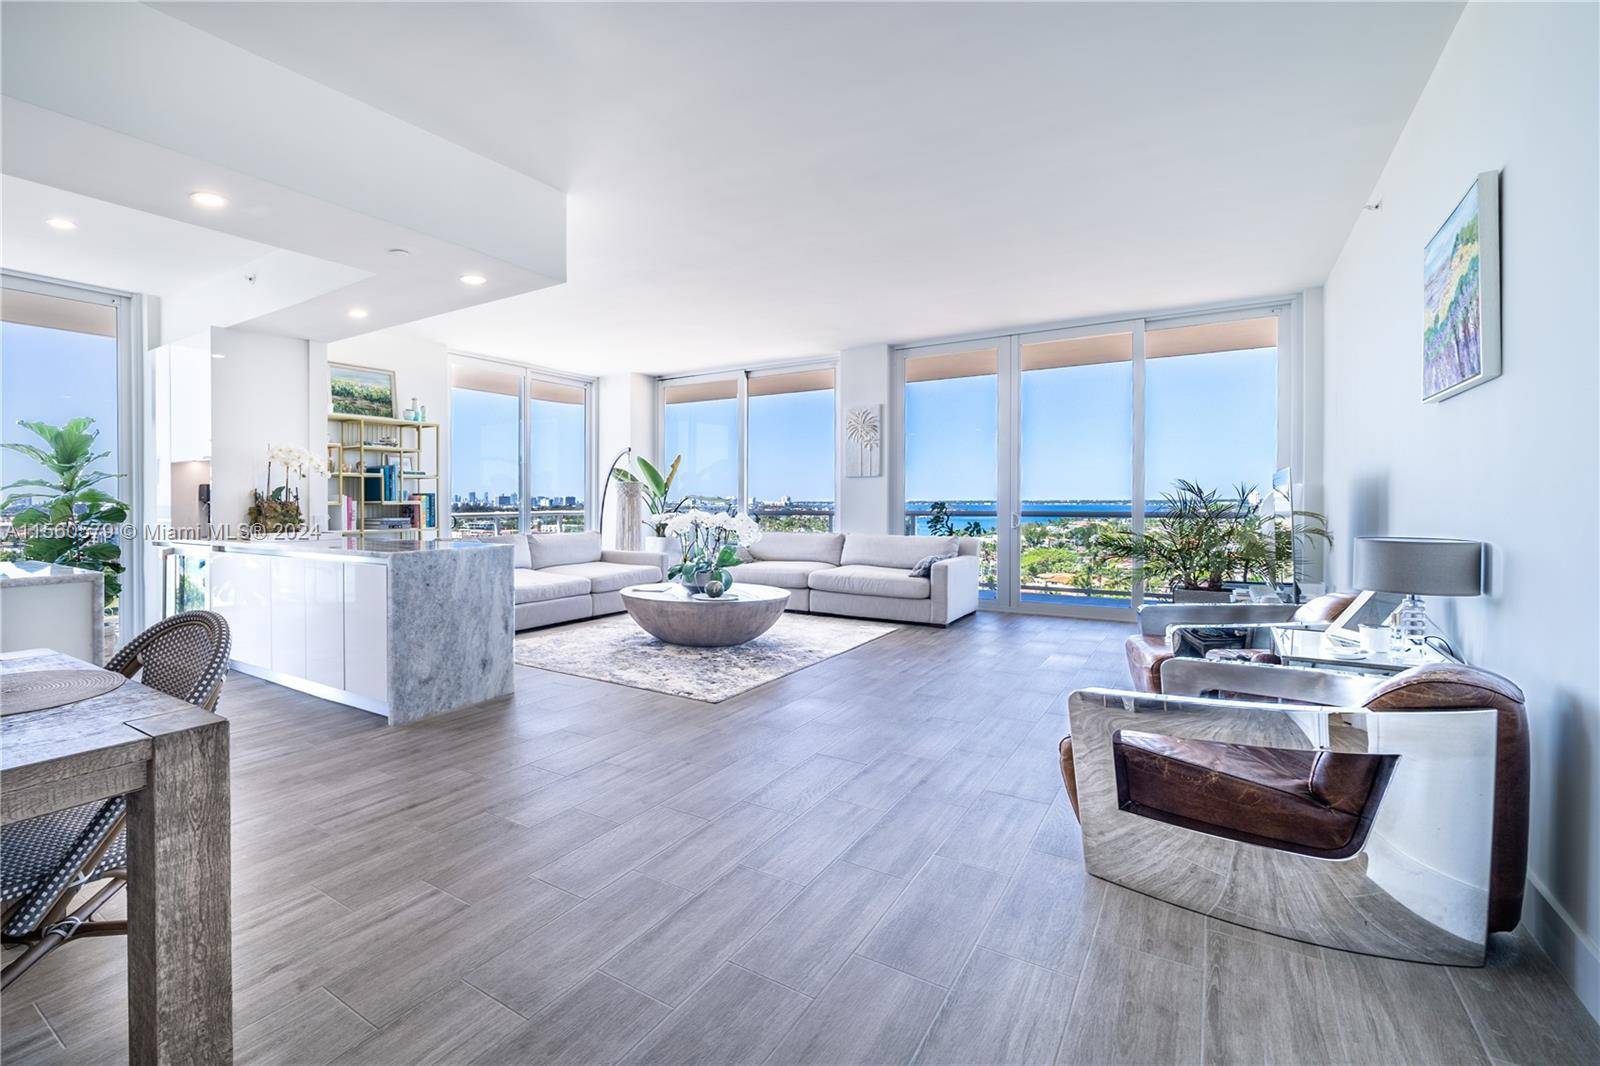 A magnificent and one of a kind Oceanfront Penthouse with unobstructed and breathtaking southeast west views of the Ocean, Intracoastal Bay, and the Miami Downtown skyline lit at night.